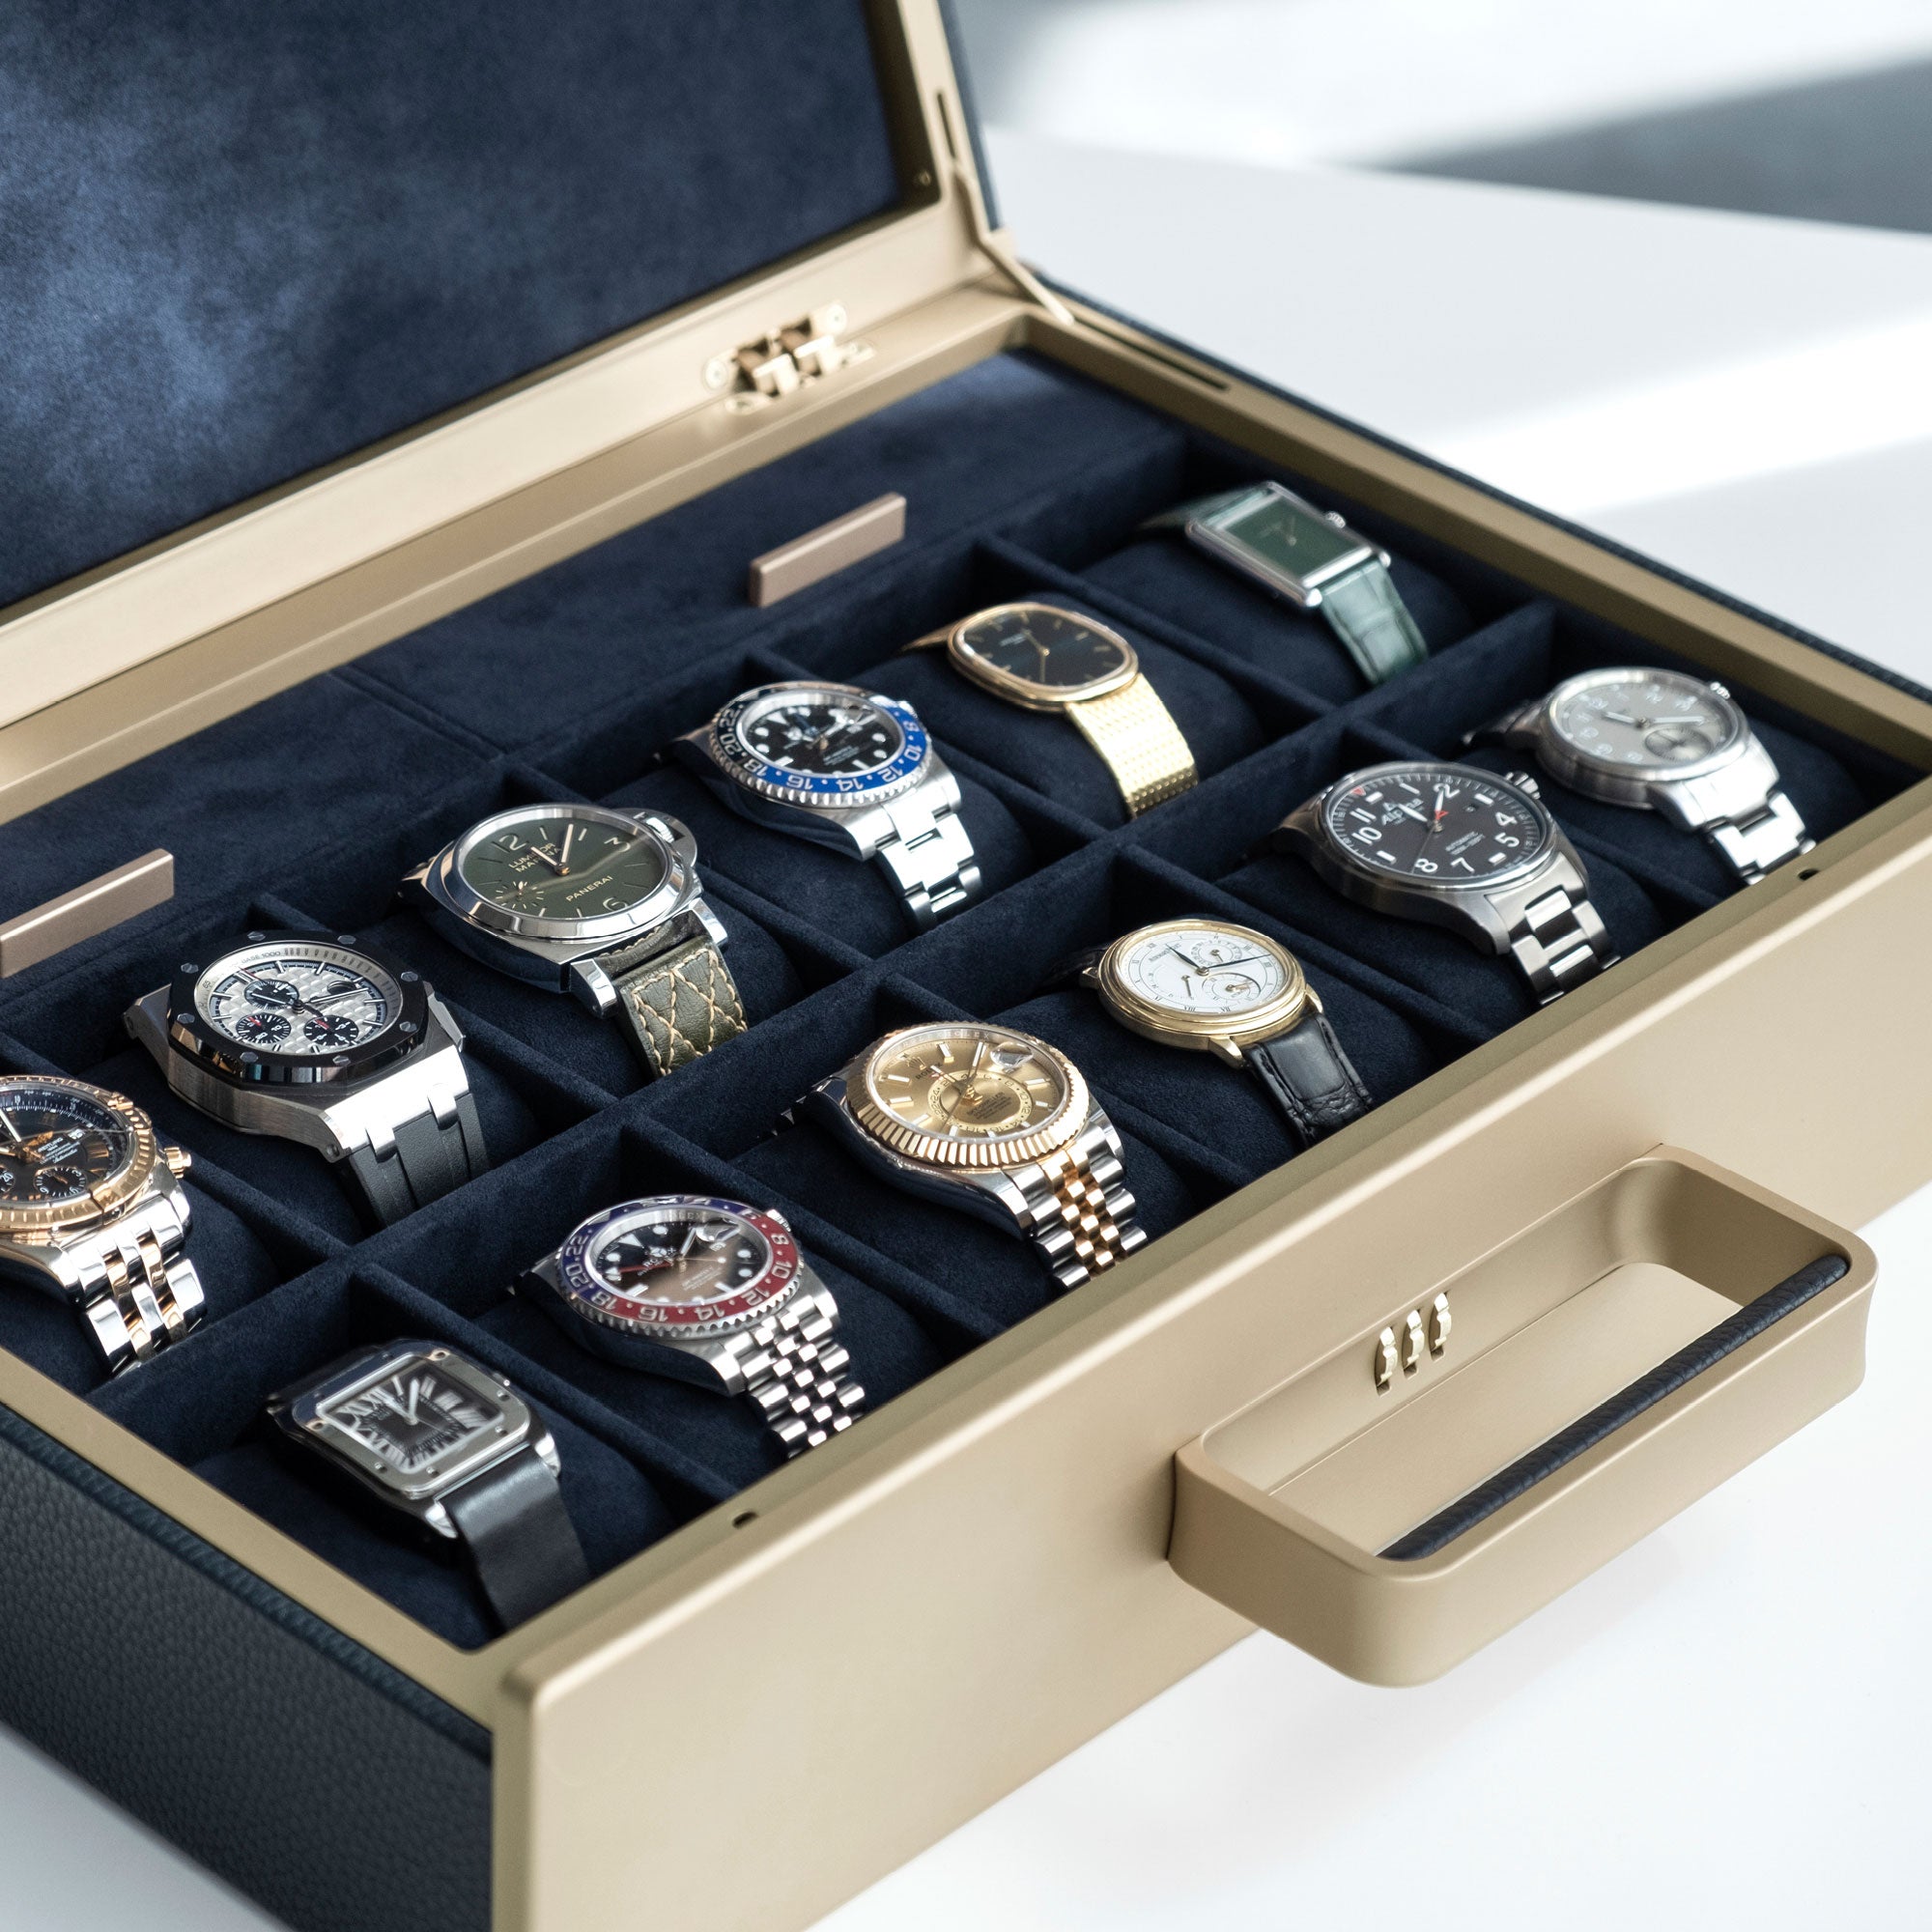 Lifestyle photo of Mackenzie Watch briefcase in gold anodized aluminum and carbon fiber and marine leather holding a collection of luxury watches, including Audemars Piguet, Patek Philippe, Rolex, Alpina and Cartier. 